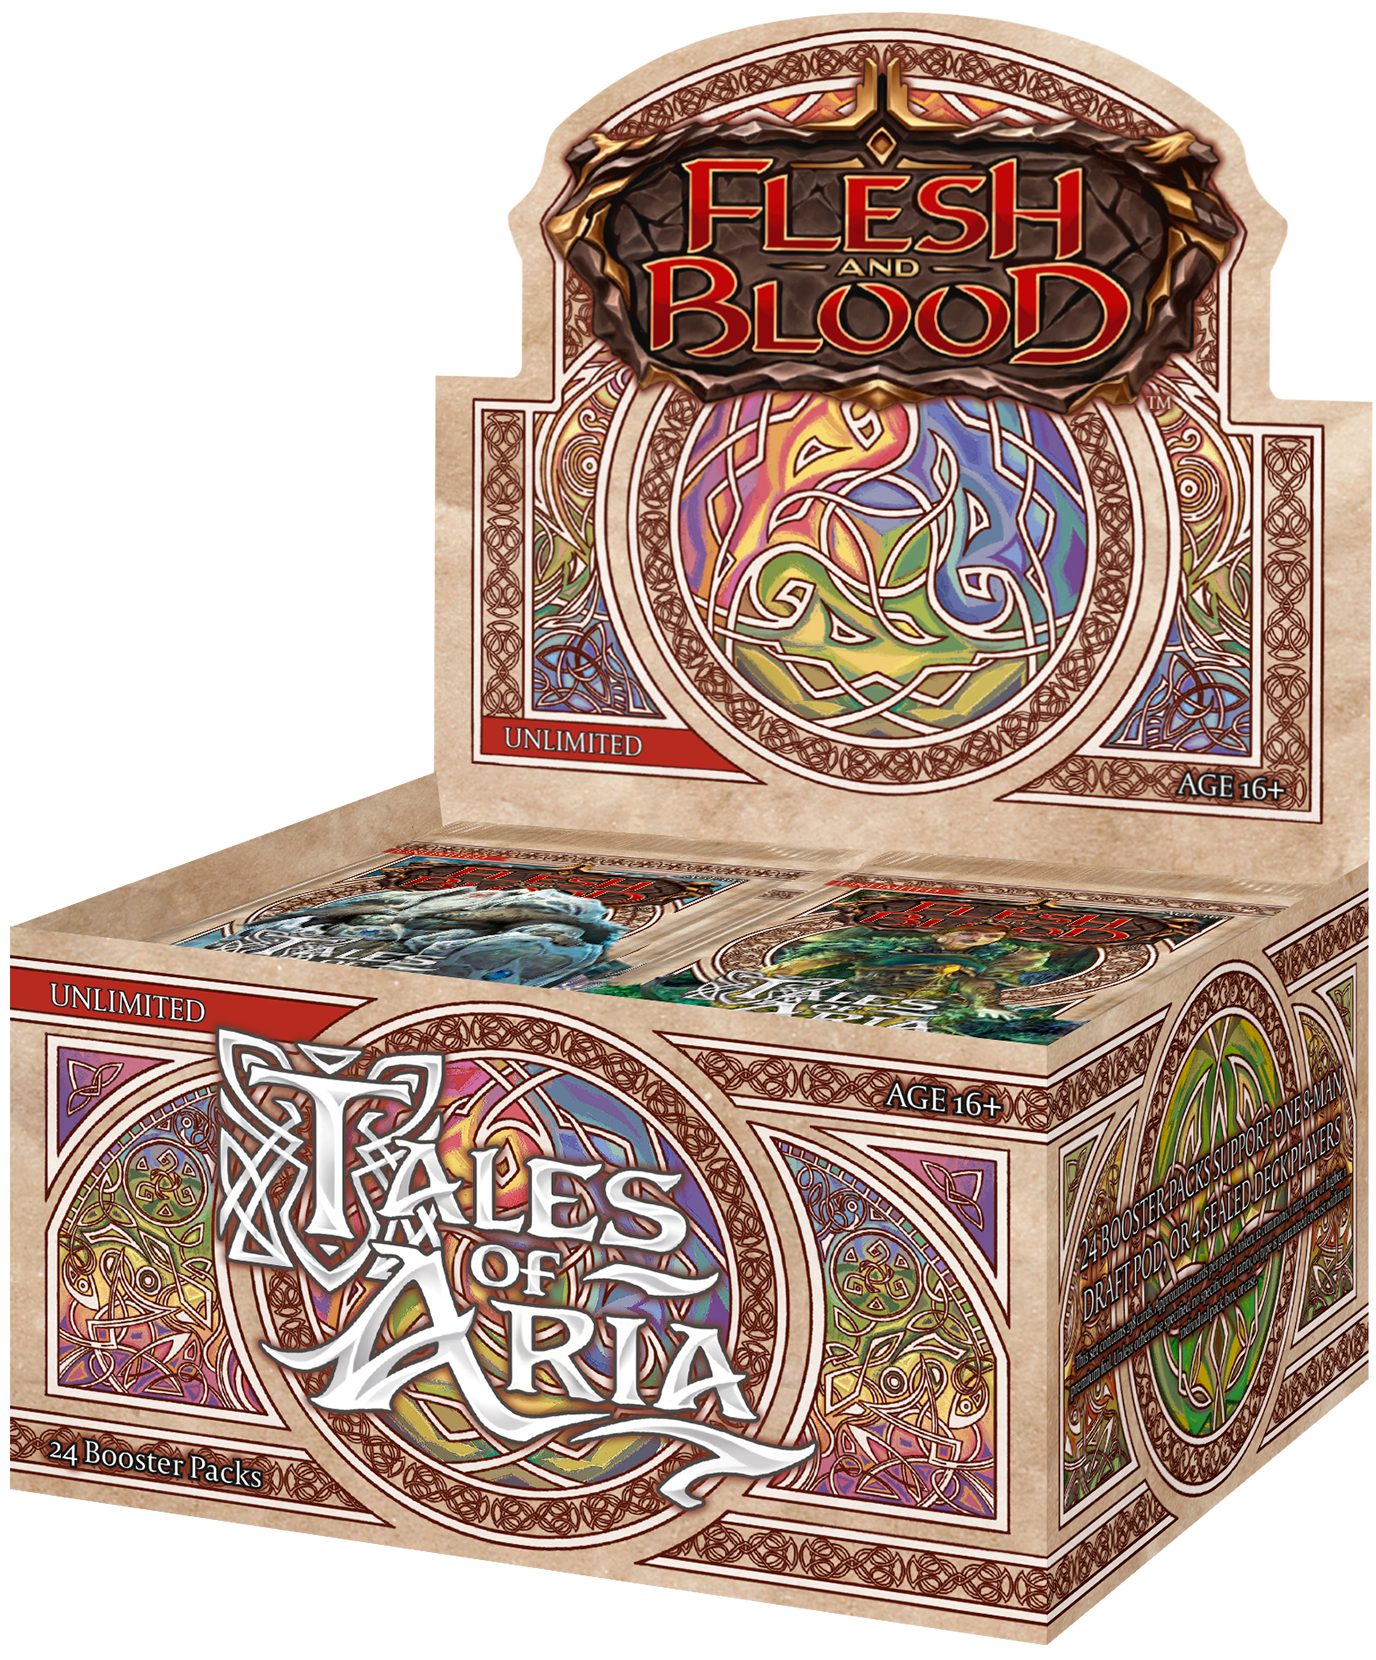 FLESH AND BLOOD TALES OF ARIA UNLIMITED BOOSTER Pack | Jack's On Queen